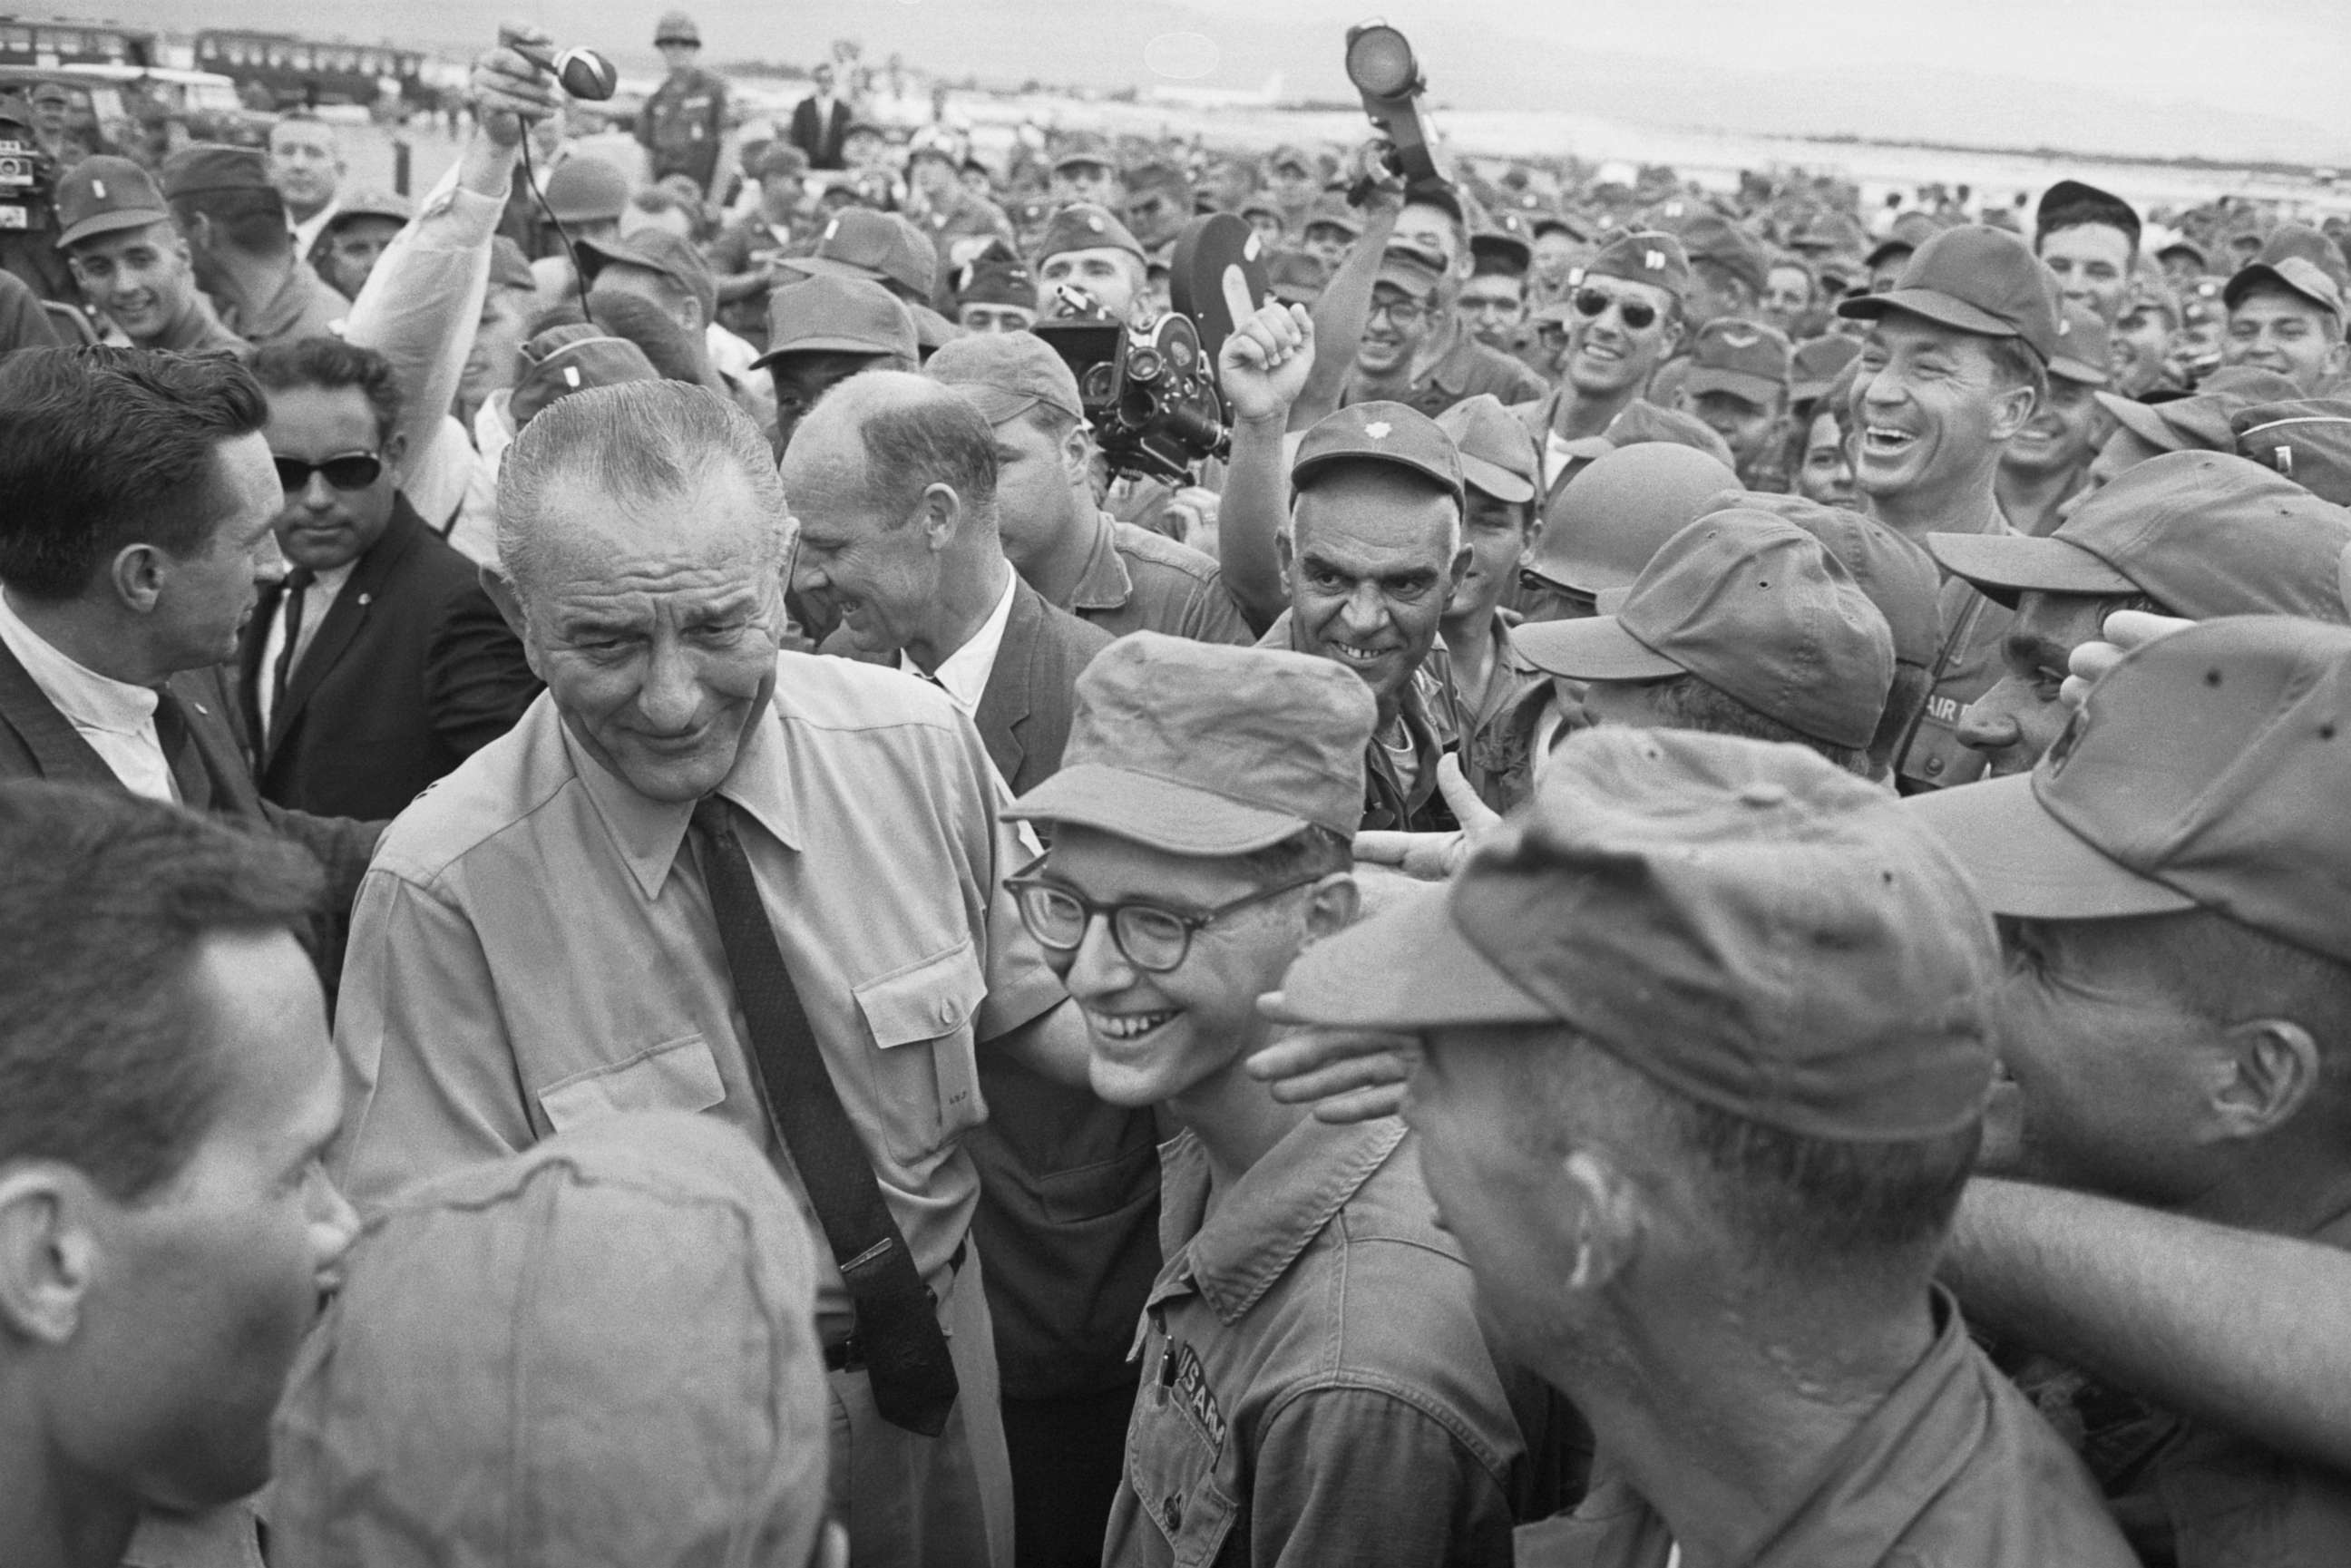 PHOTO: Cheering U.S. soldiers surround President Johnson as he arrives on an un-announced visit, Oct. 26, 1966, in Cam Ranh, Vietnam.